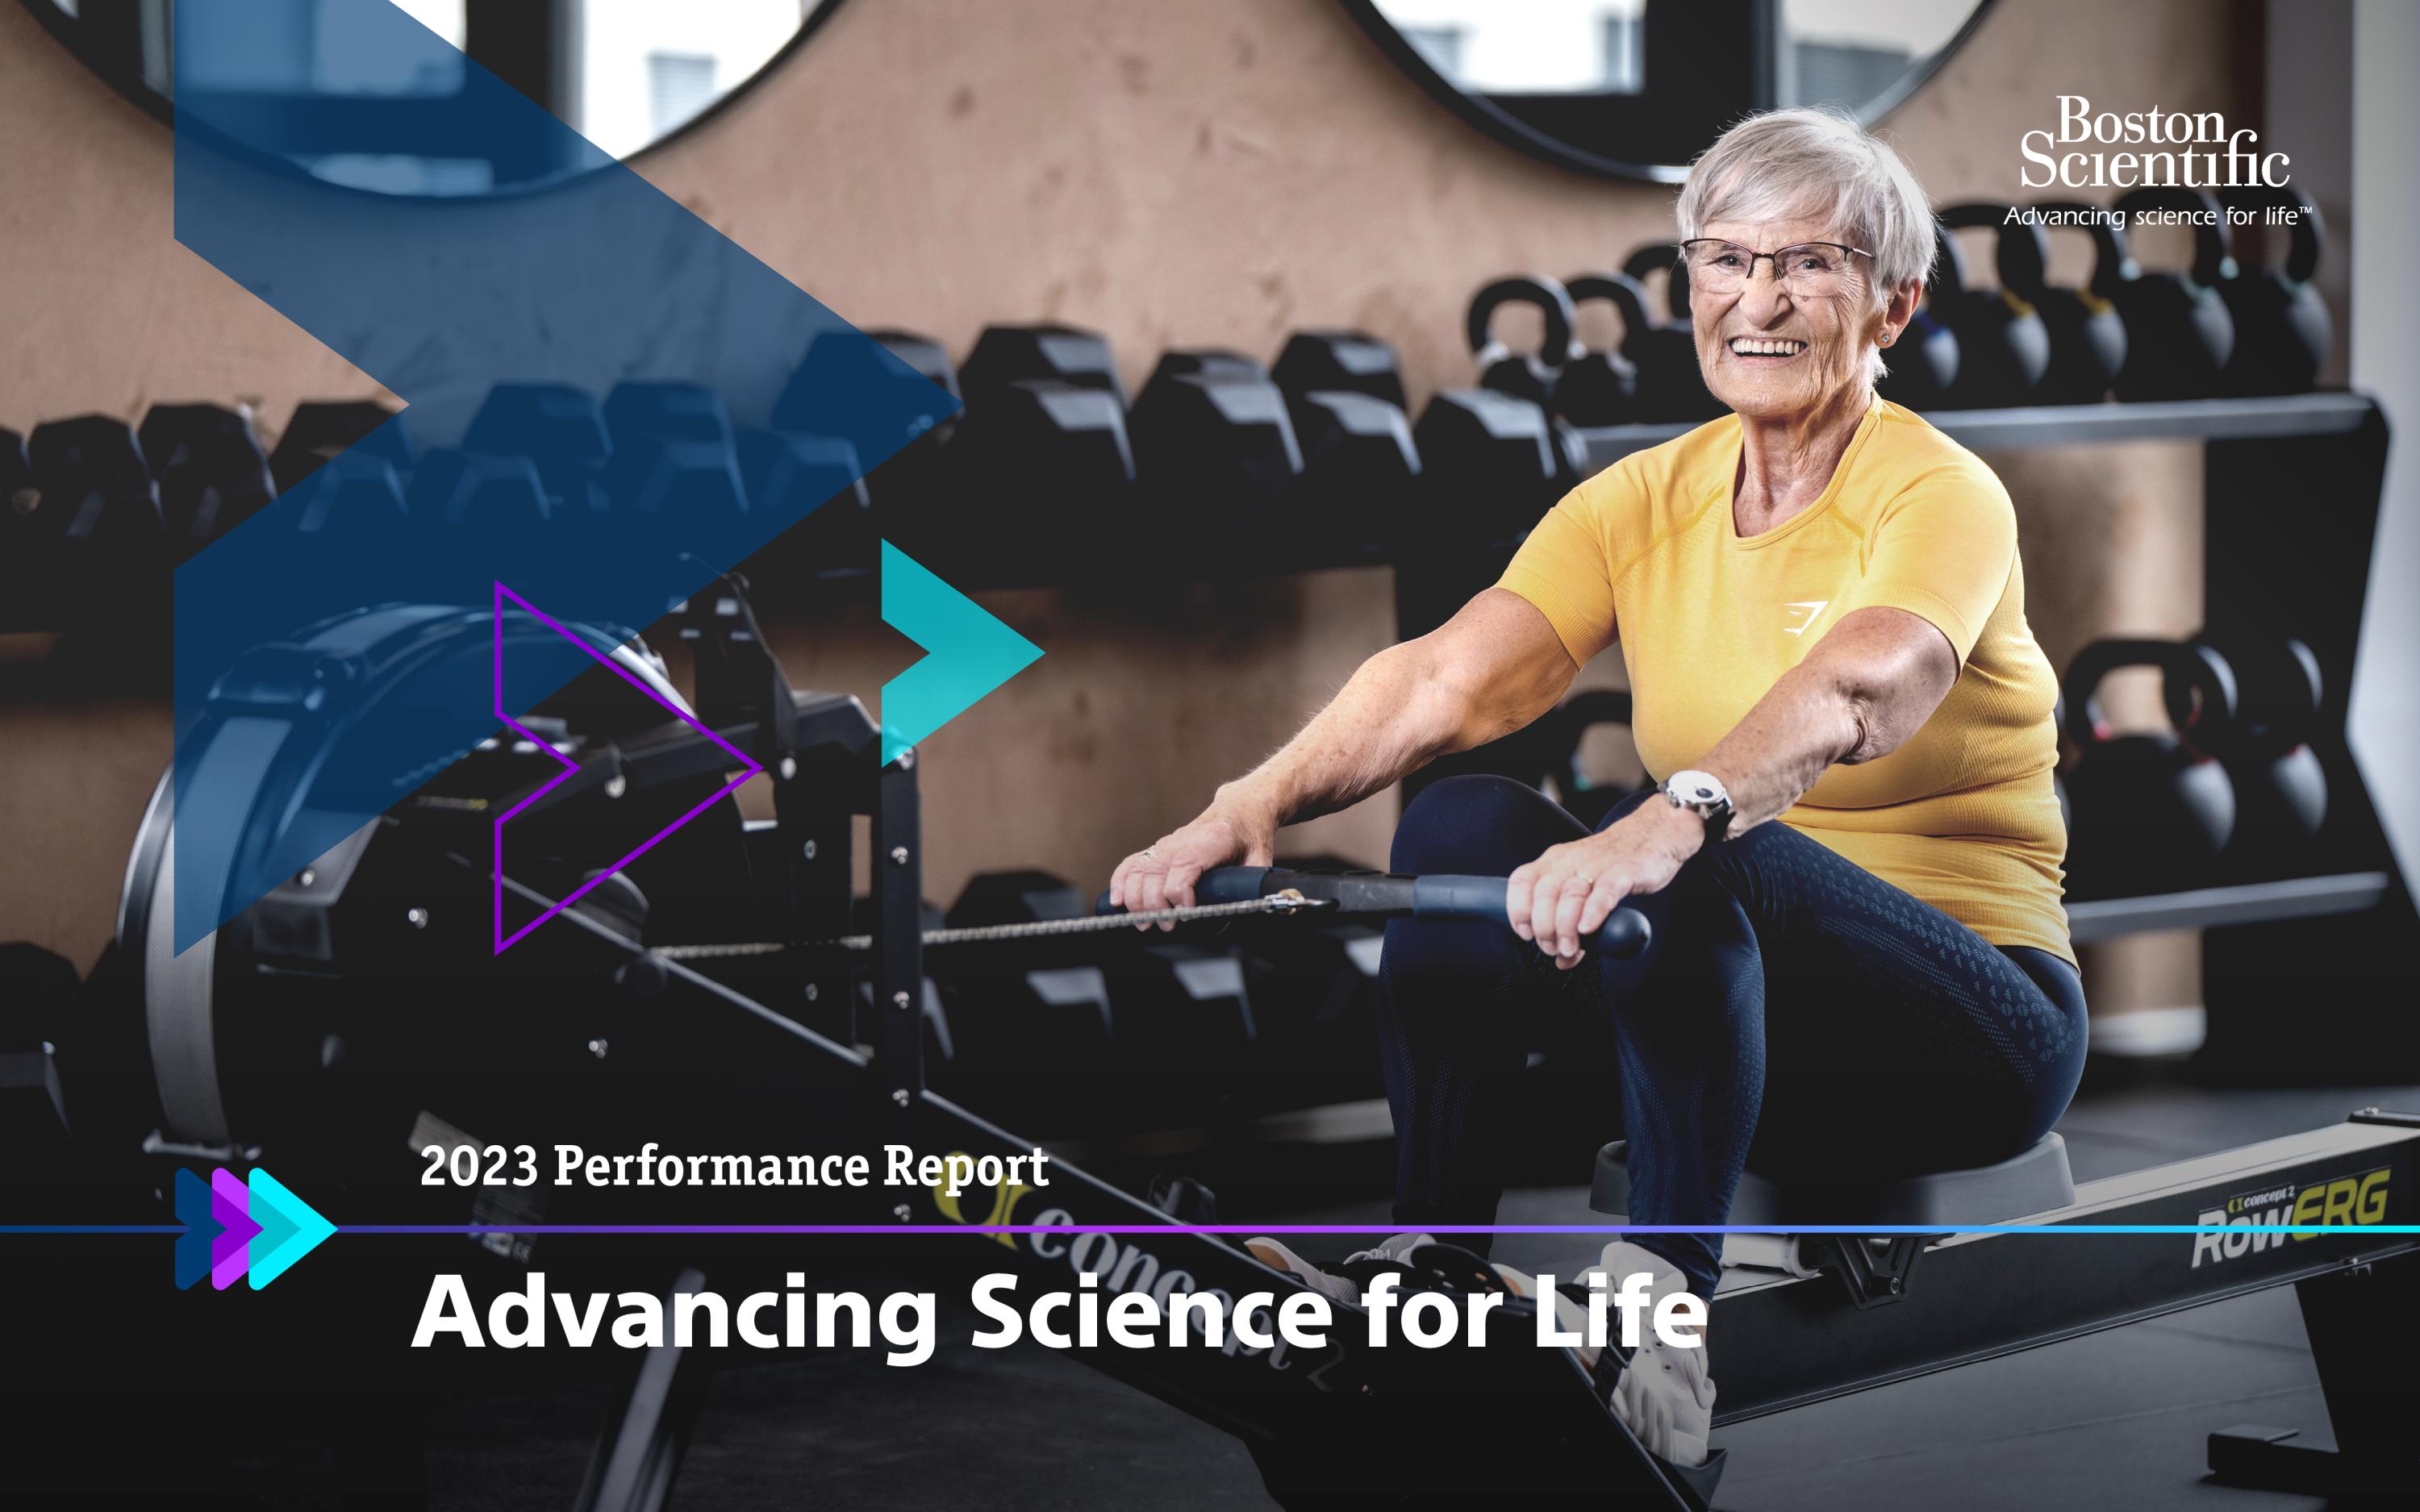 woman sitting on a rowing machine with "Advancing Science for Life"